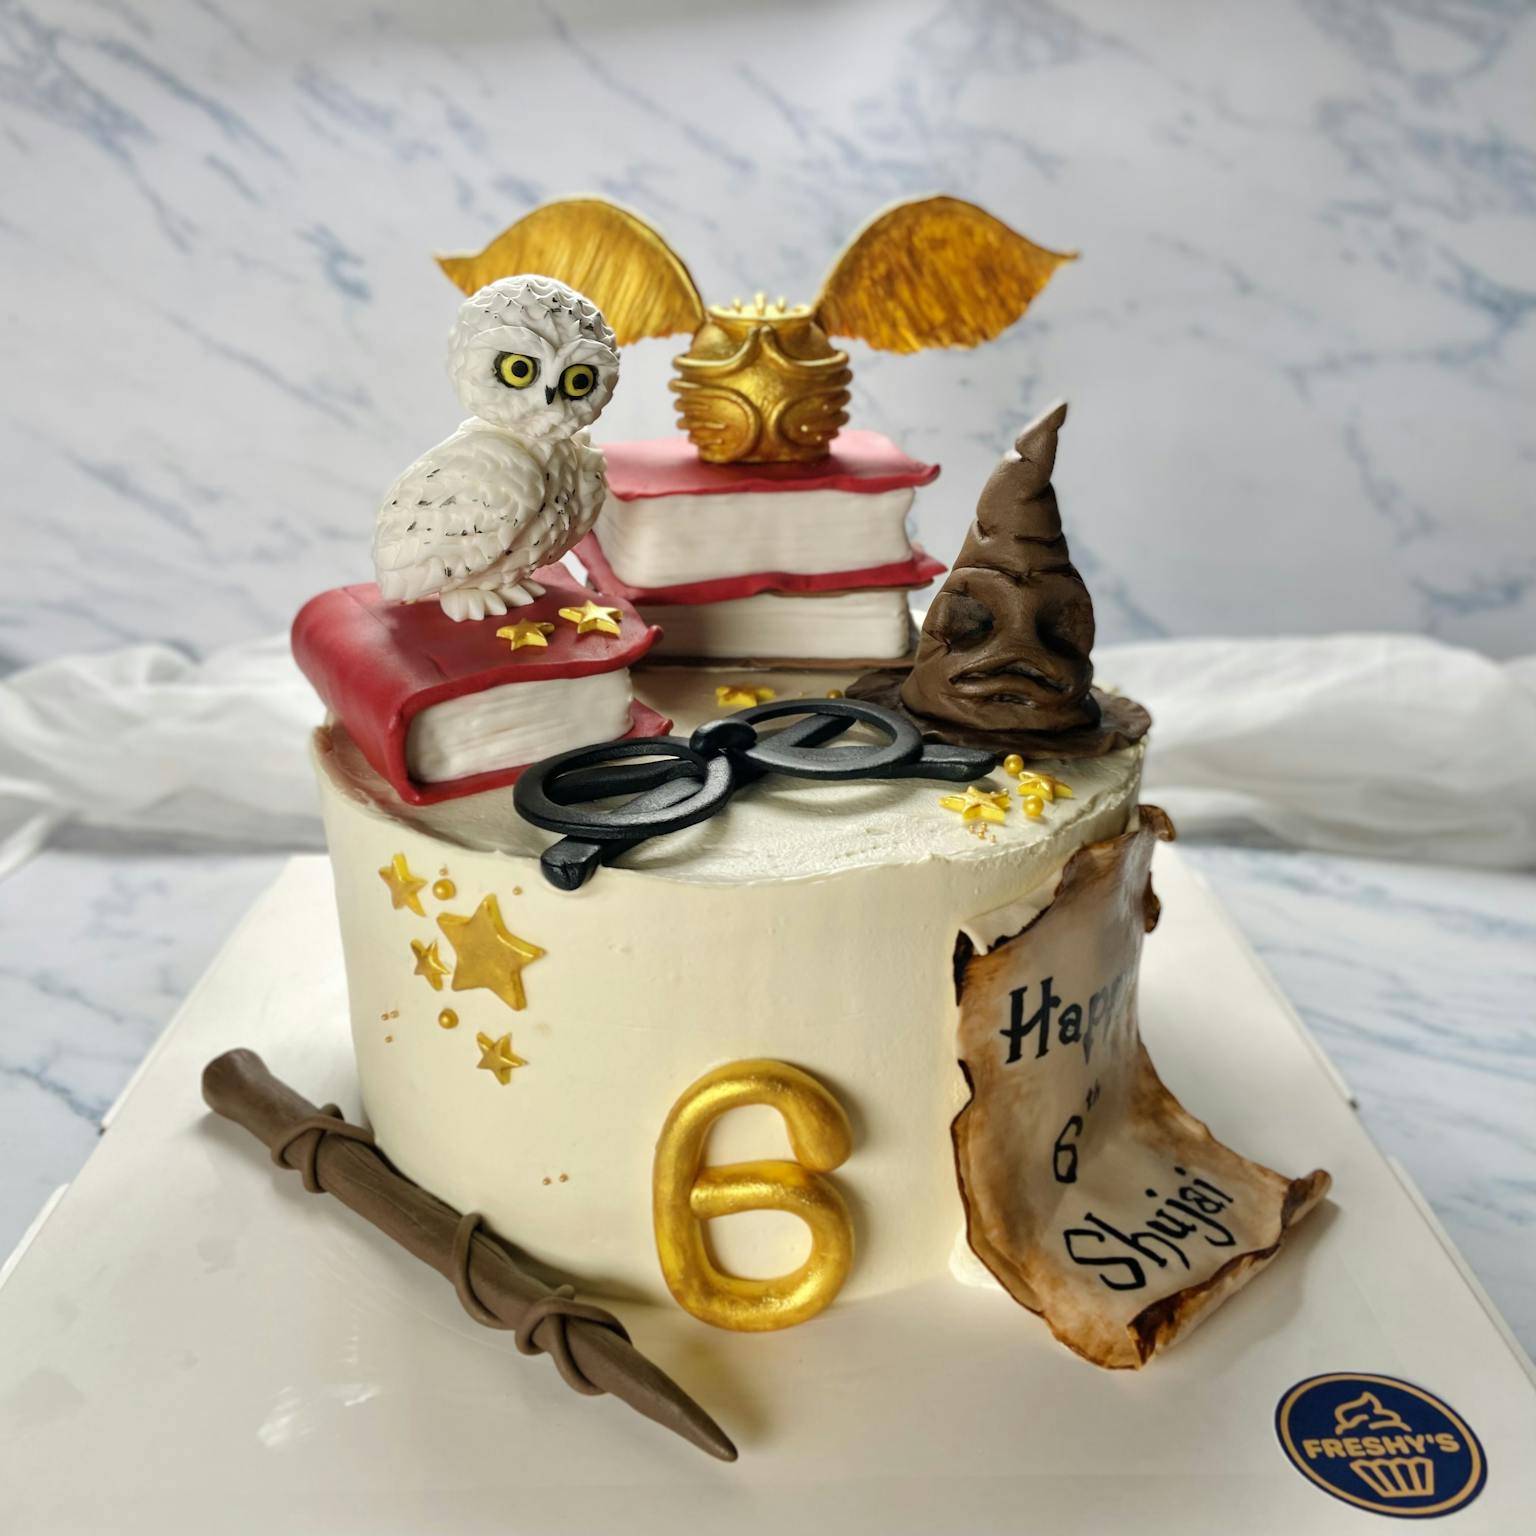 Sweet Cherub Edible Art and Printing - Harry potter baby shower cake.  Buttercream finish with buttercream and fondant details, with a delicious  blackforrest cake on the inside.😋 Please be aware I will